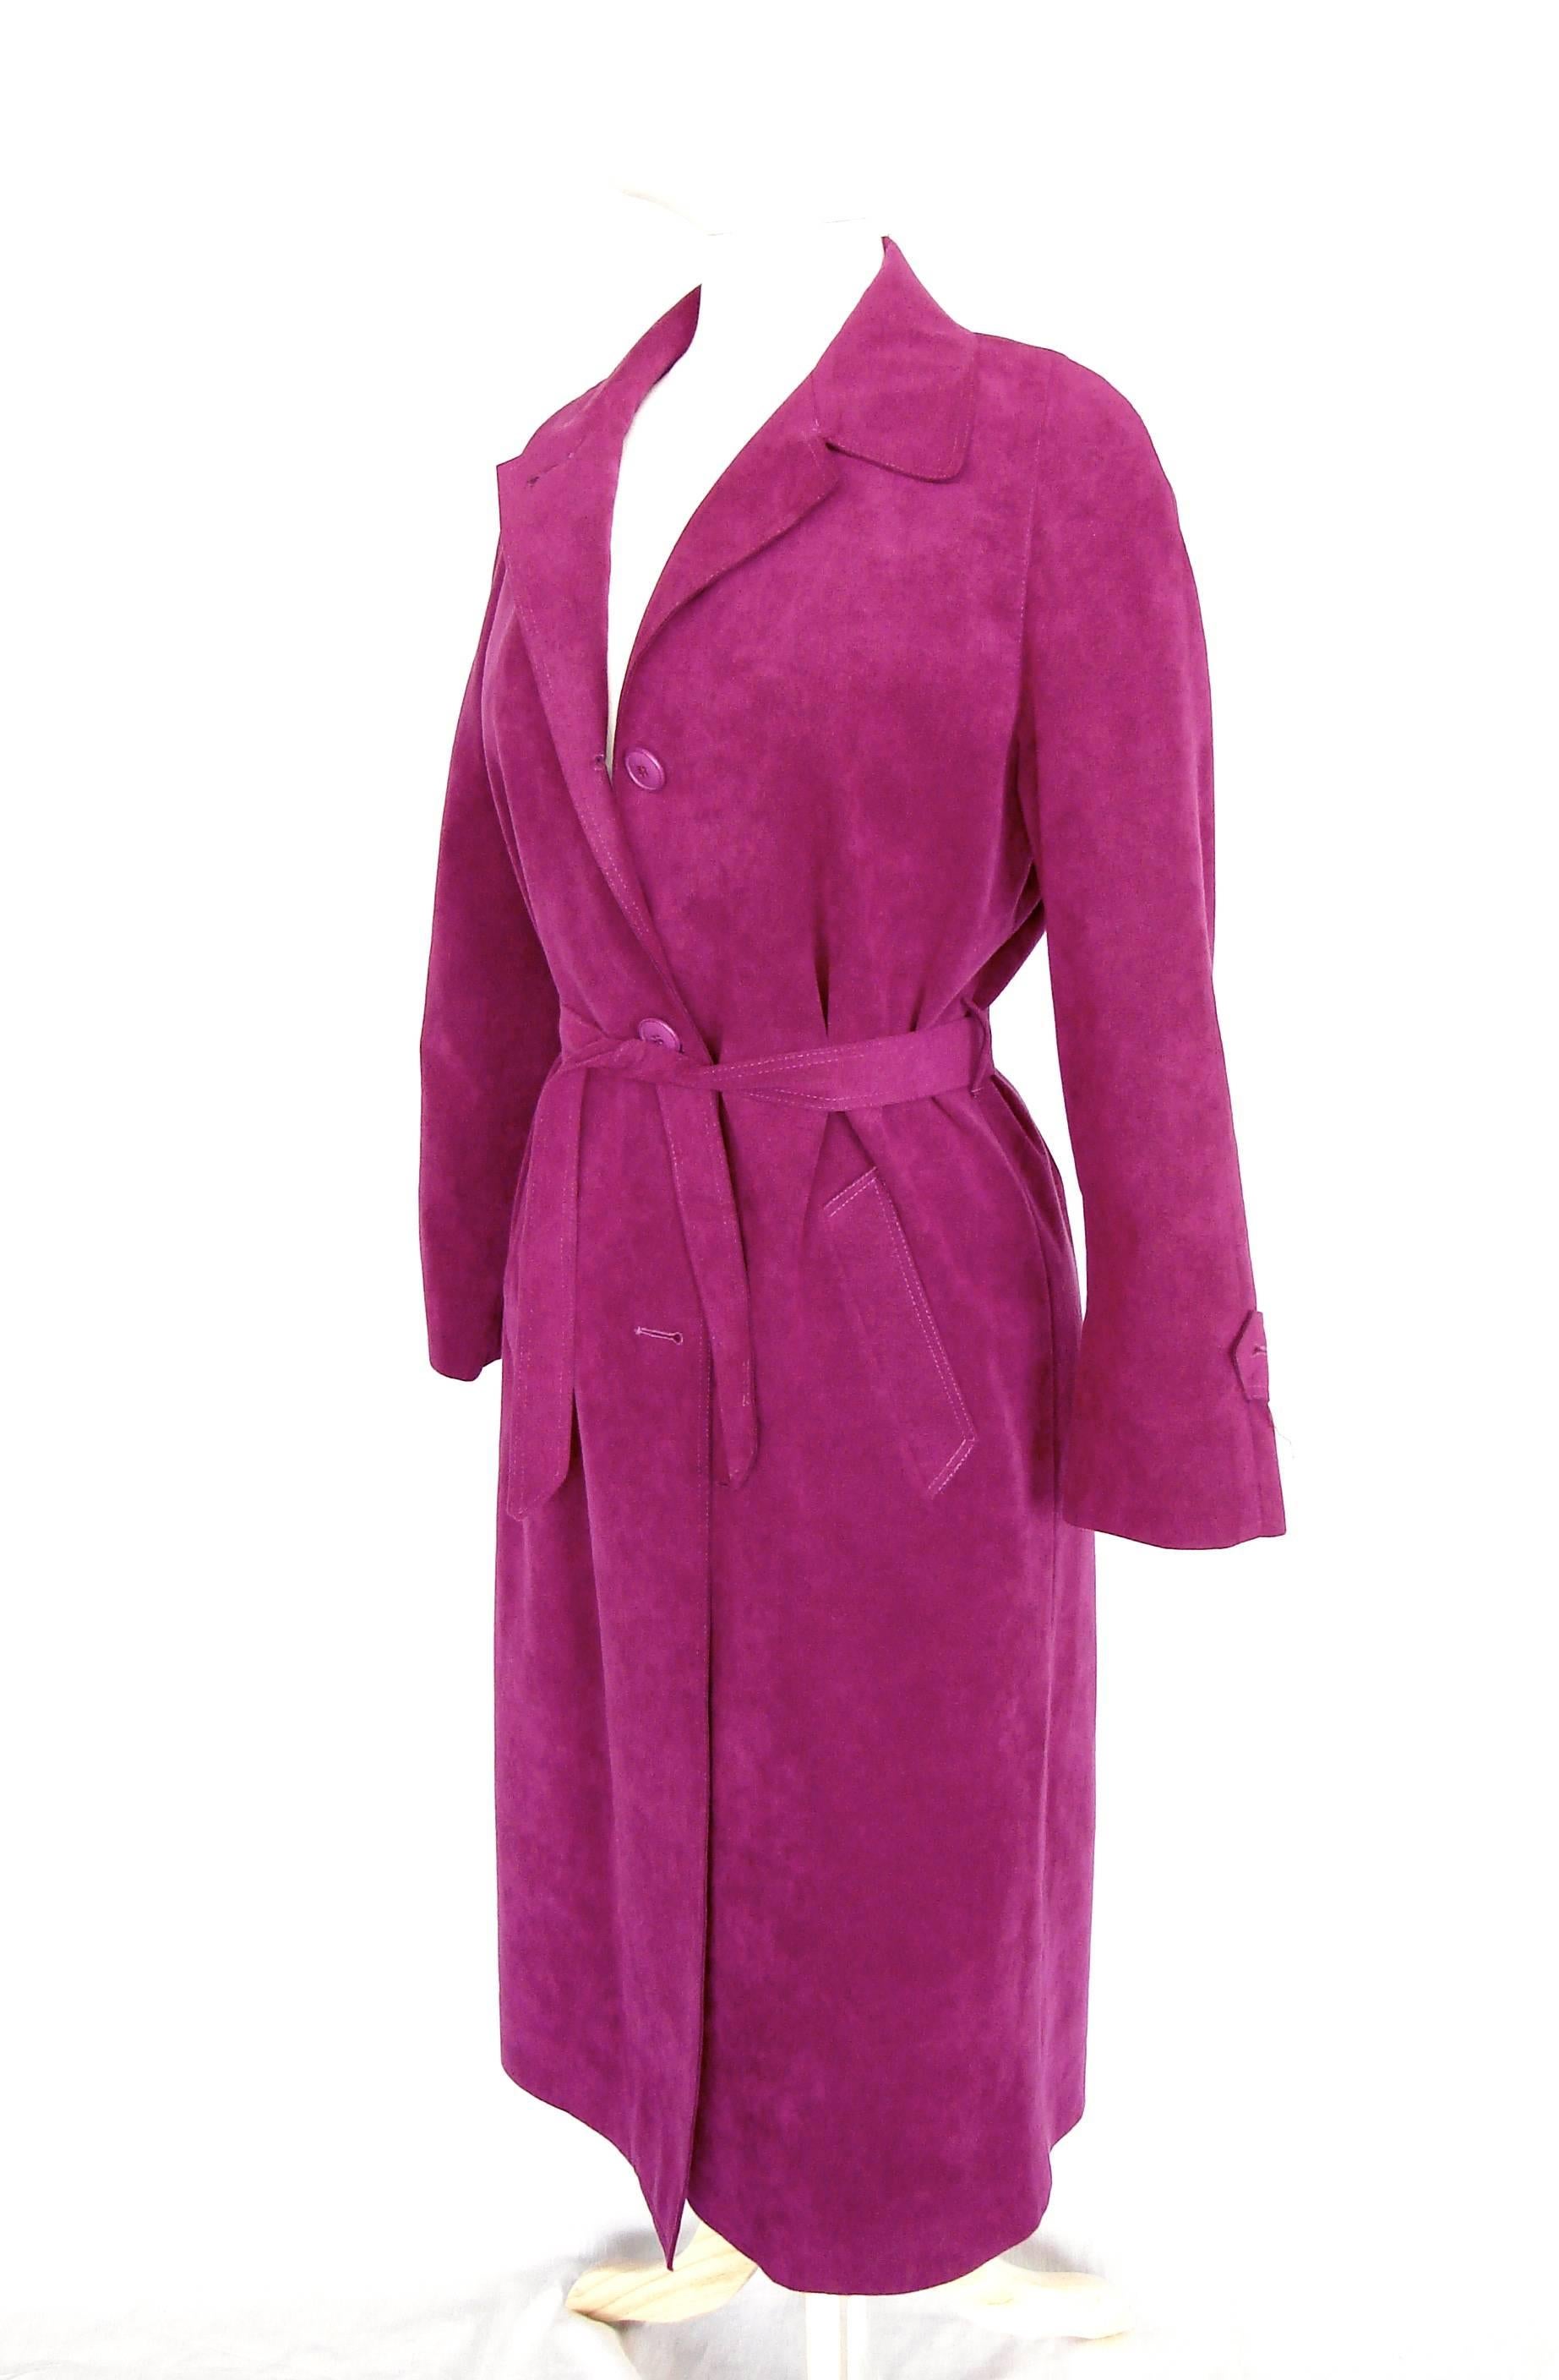 Lilli Ann Vibrant Magenta Ultrasuede Belted Trench Coat Size M 1970s 2